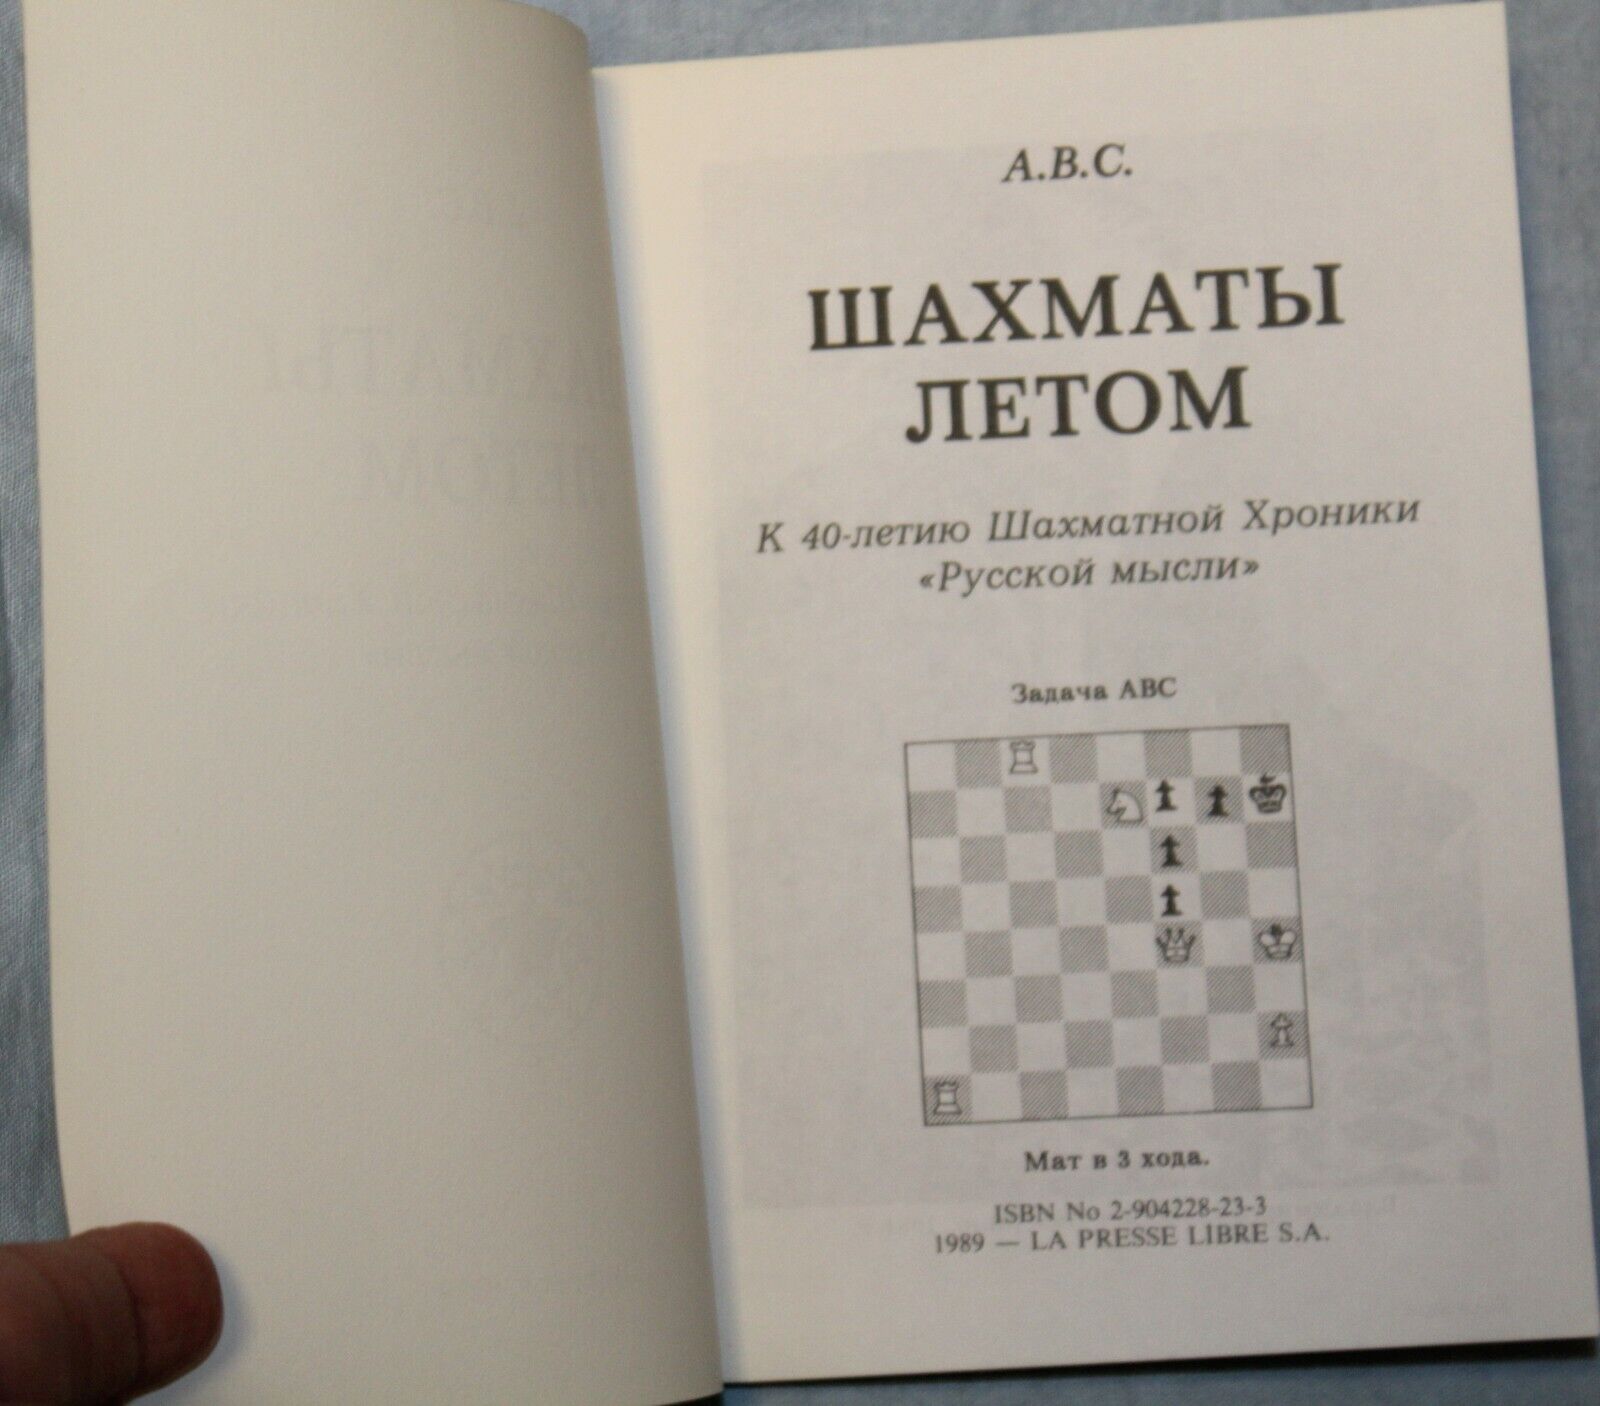 11496.Russian chess book: A. V. S. (Avierino. V. S.) Chess in the summer. Paris, 1989